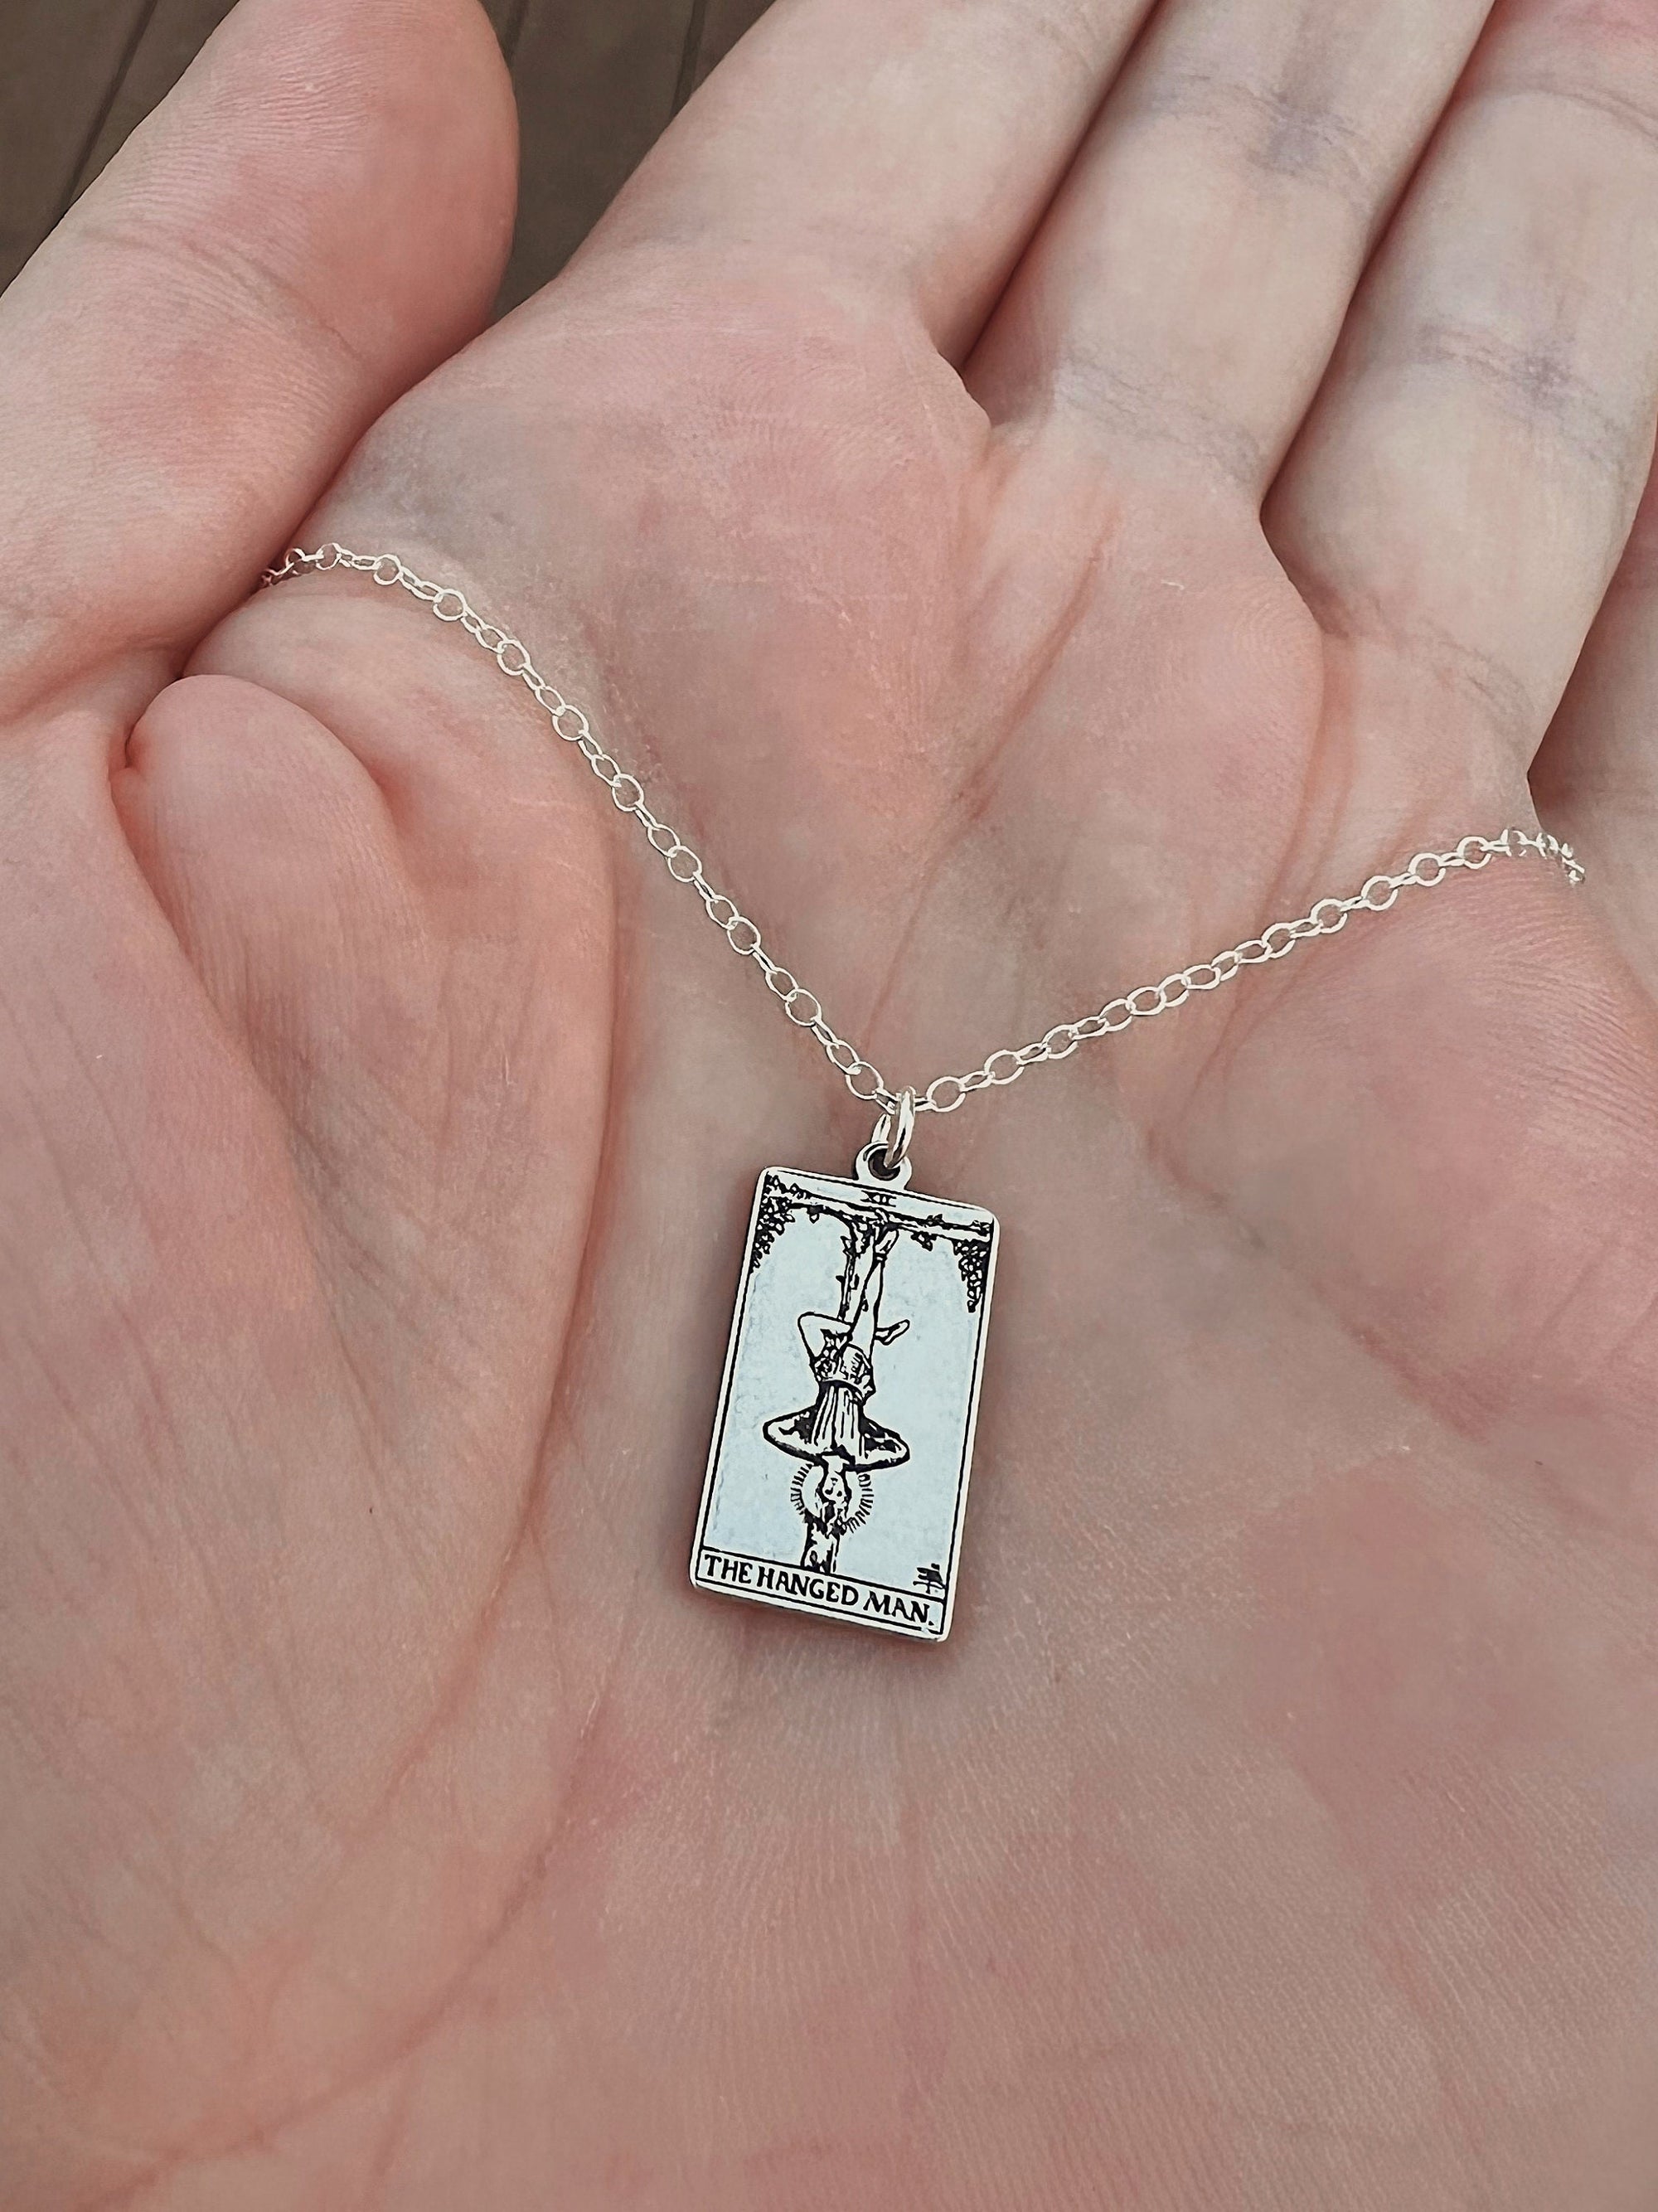 The Hanged Man Tarot Card Necklace - Sterling Silver